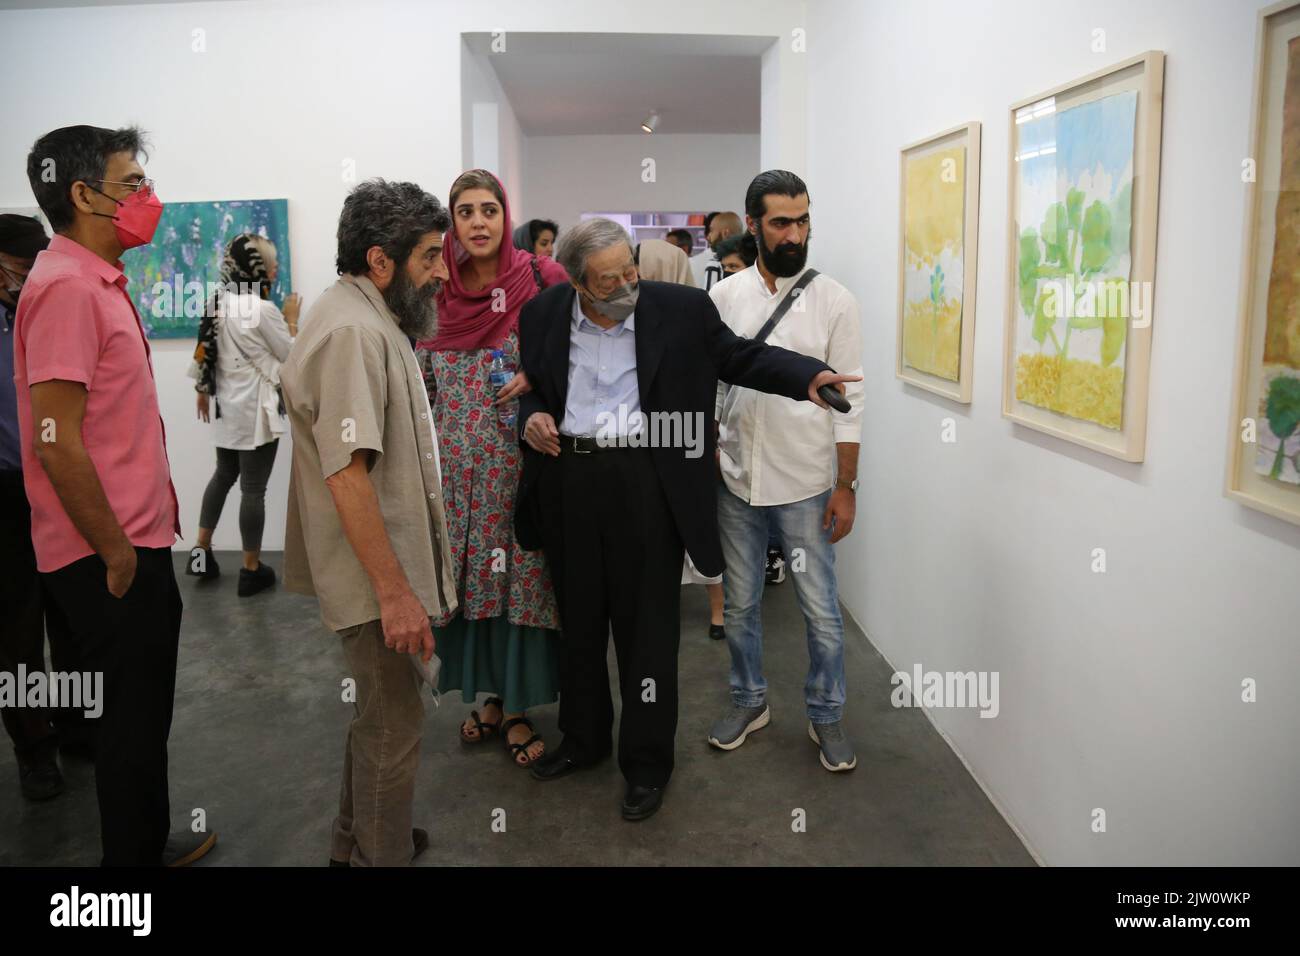 Tehran, Iranan. 2nd Sep, 2022. Iranian poet, novelist, screenwriter, and painter, AHMADREZA AHMADI (C) (born 1940) attends his second painting solo exhibition titled ''There Was a Stain of Life on the Wall'' at O Gallery, in Tehran, Iran. Ahmadi's first book of poetry, Tarh (Sketch), was published in 1962. His poetry has its roots in French Surrealism and the American Imagists especially in poets like Saint John Perse, Paul Eluard, Louis Aragon, and Ezra Pound. The history of Persian modern poetry calls him the founder of New Wave Poetry in Iran. Stock Photo